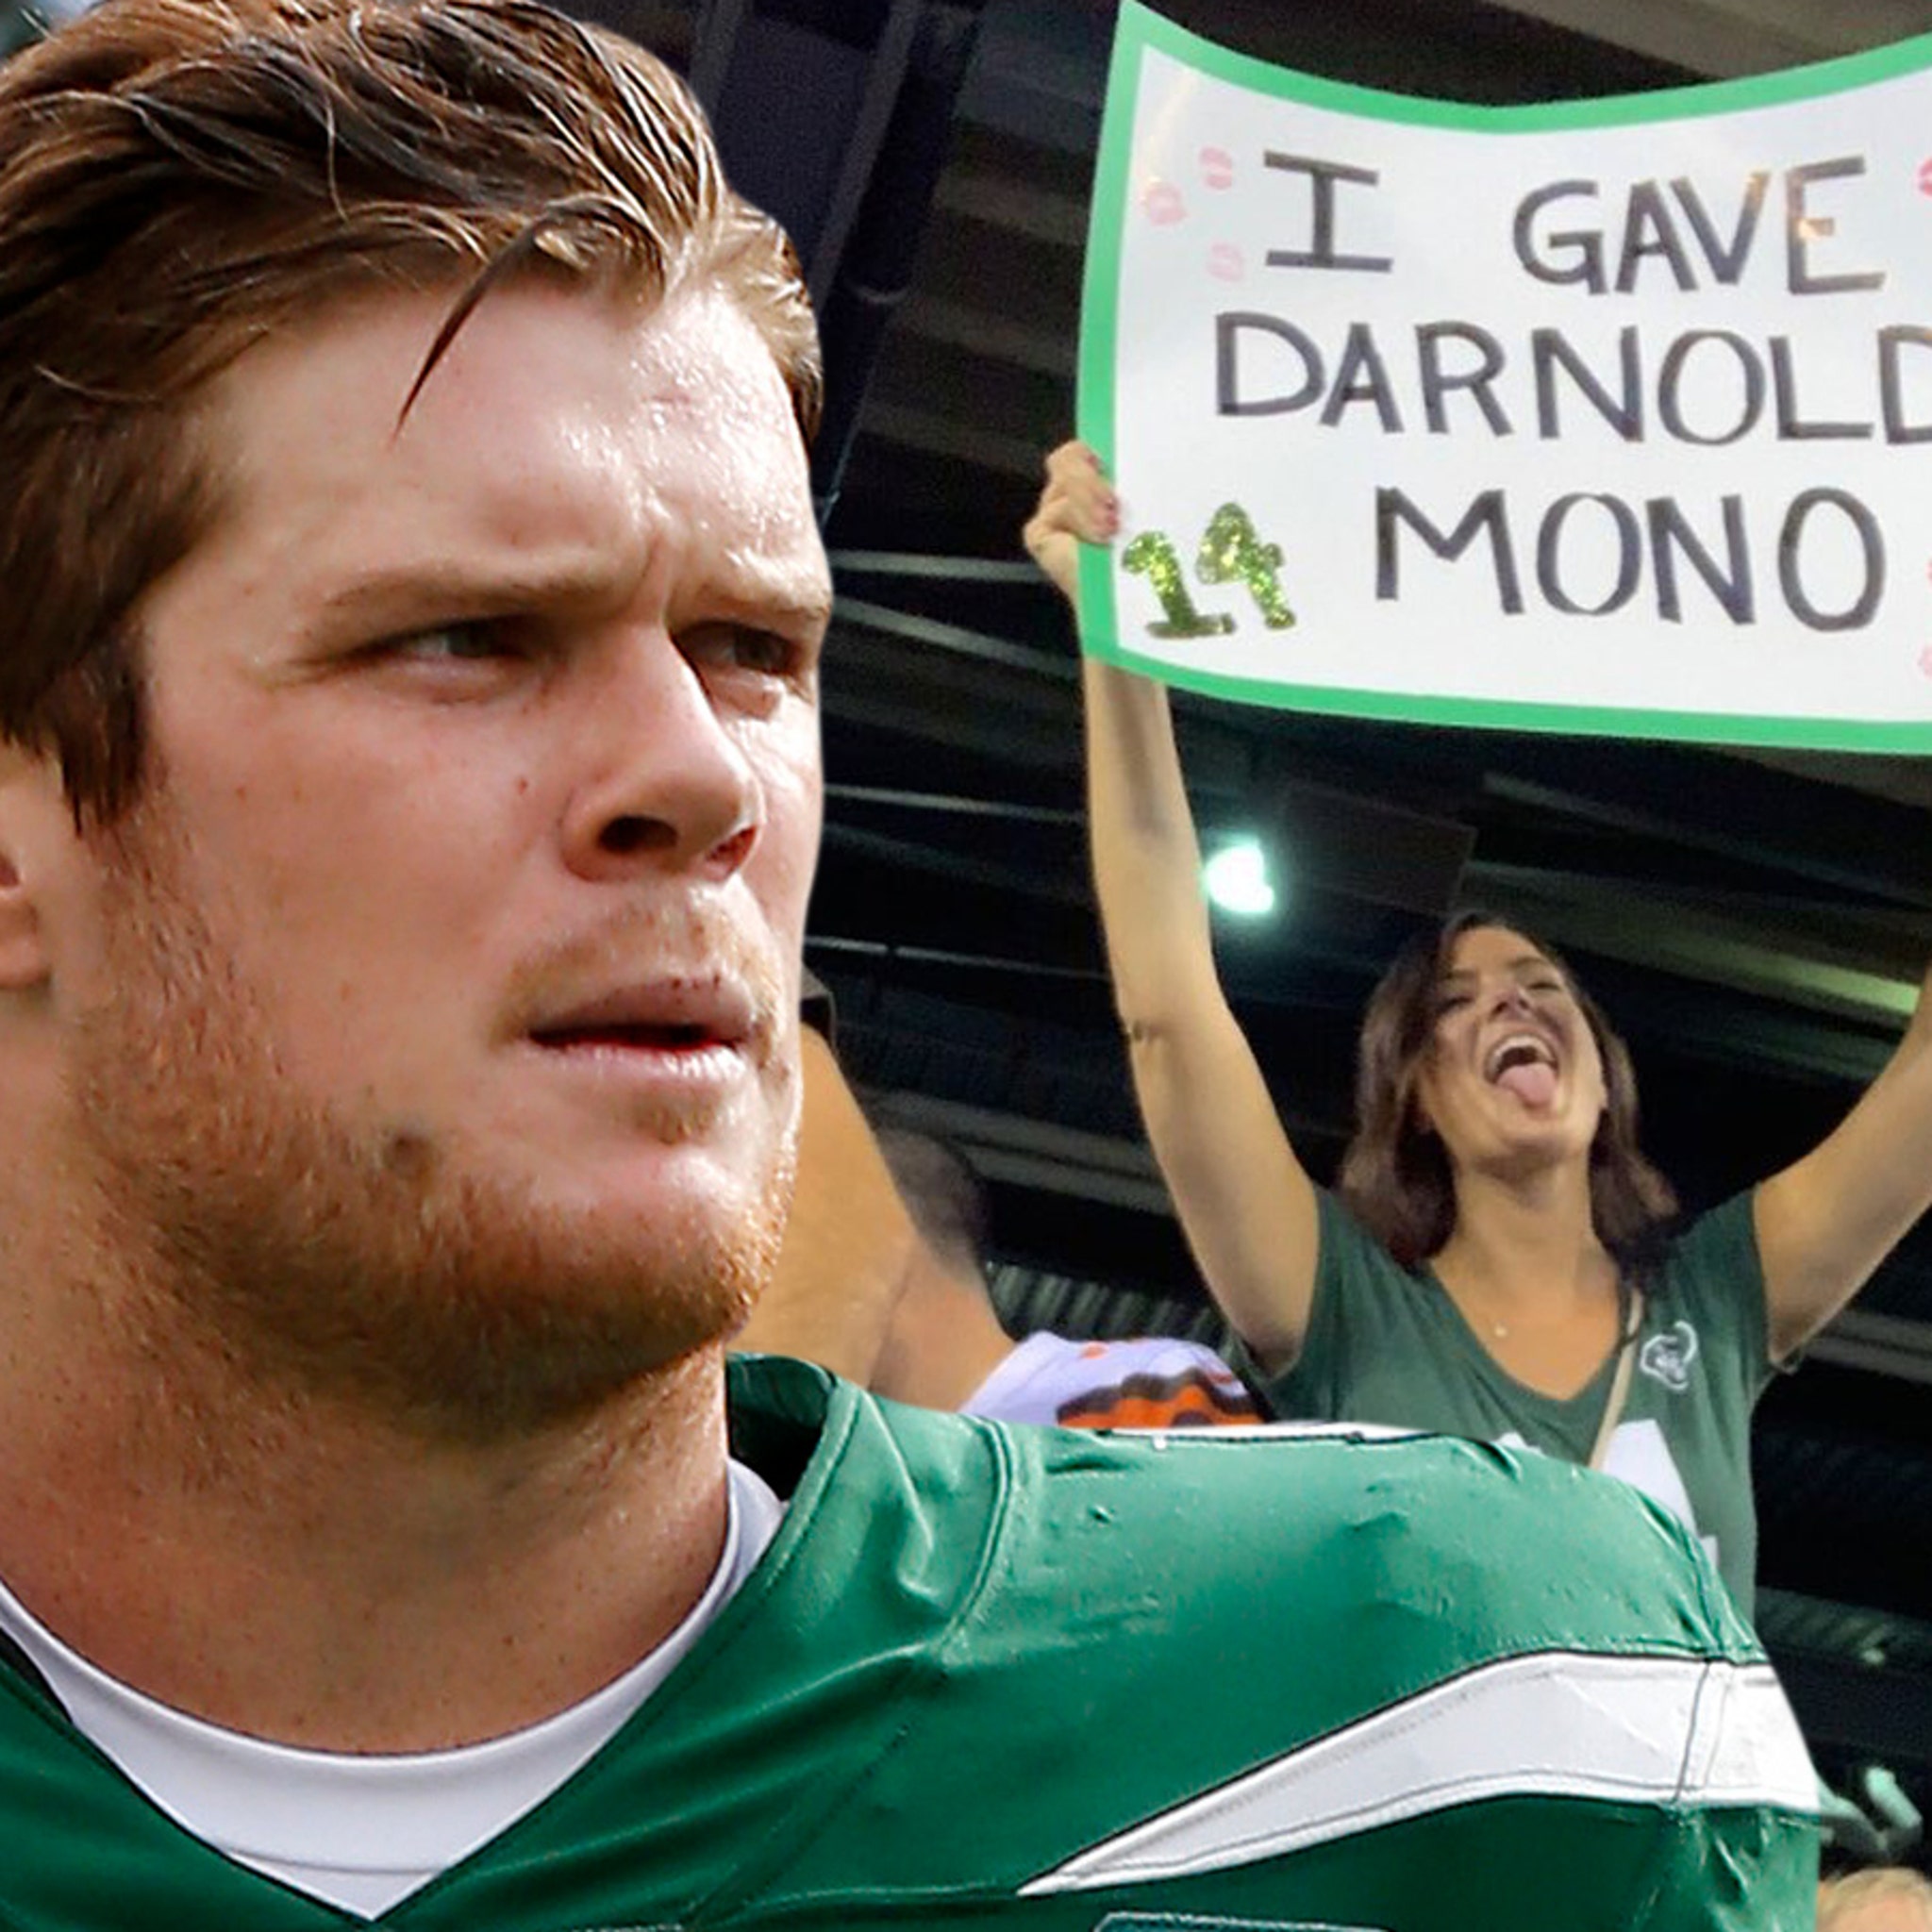 Sam Darnold Says Viral Sign Girl Didn't Give Him Mono, Never Met Her!!!